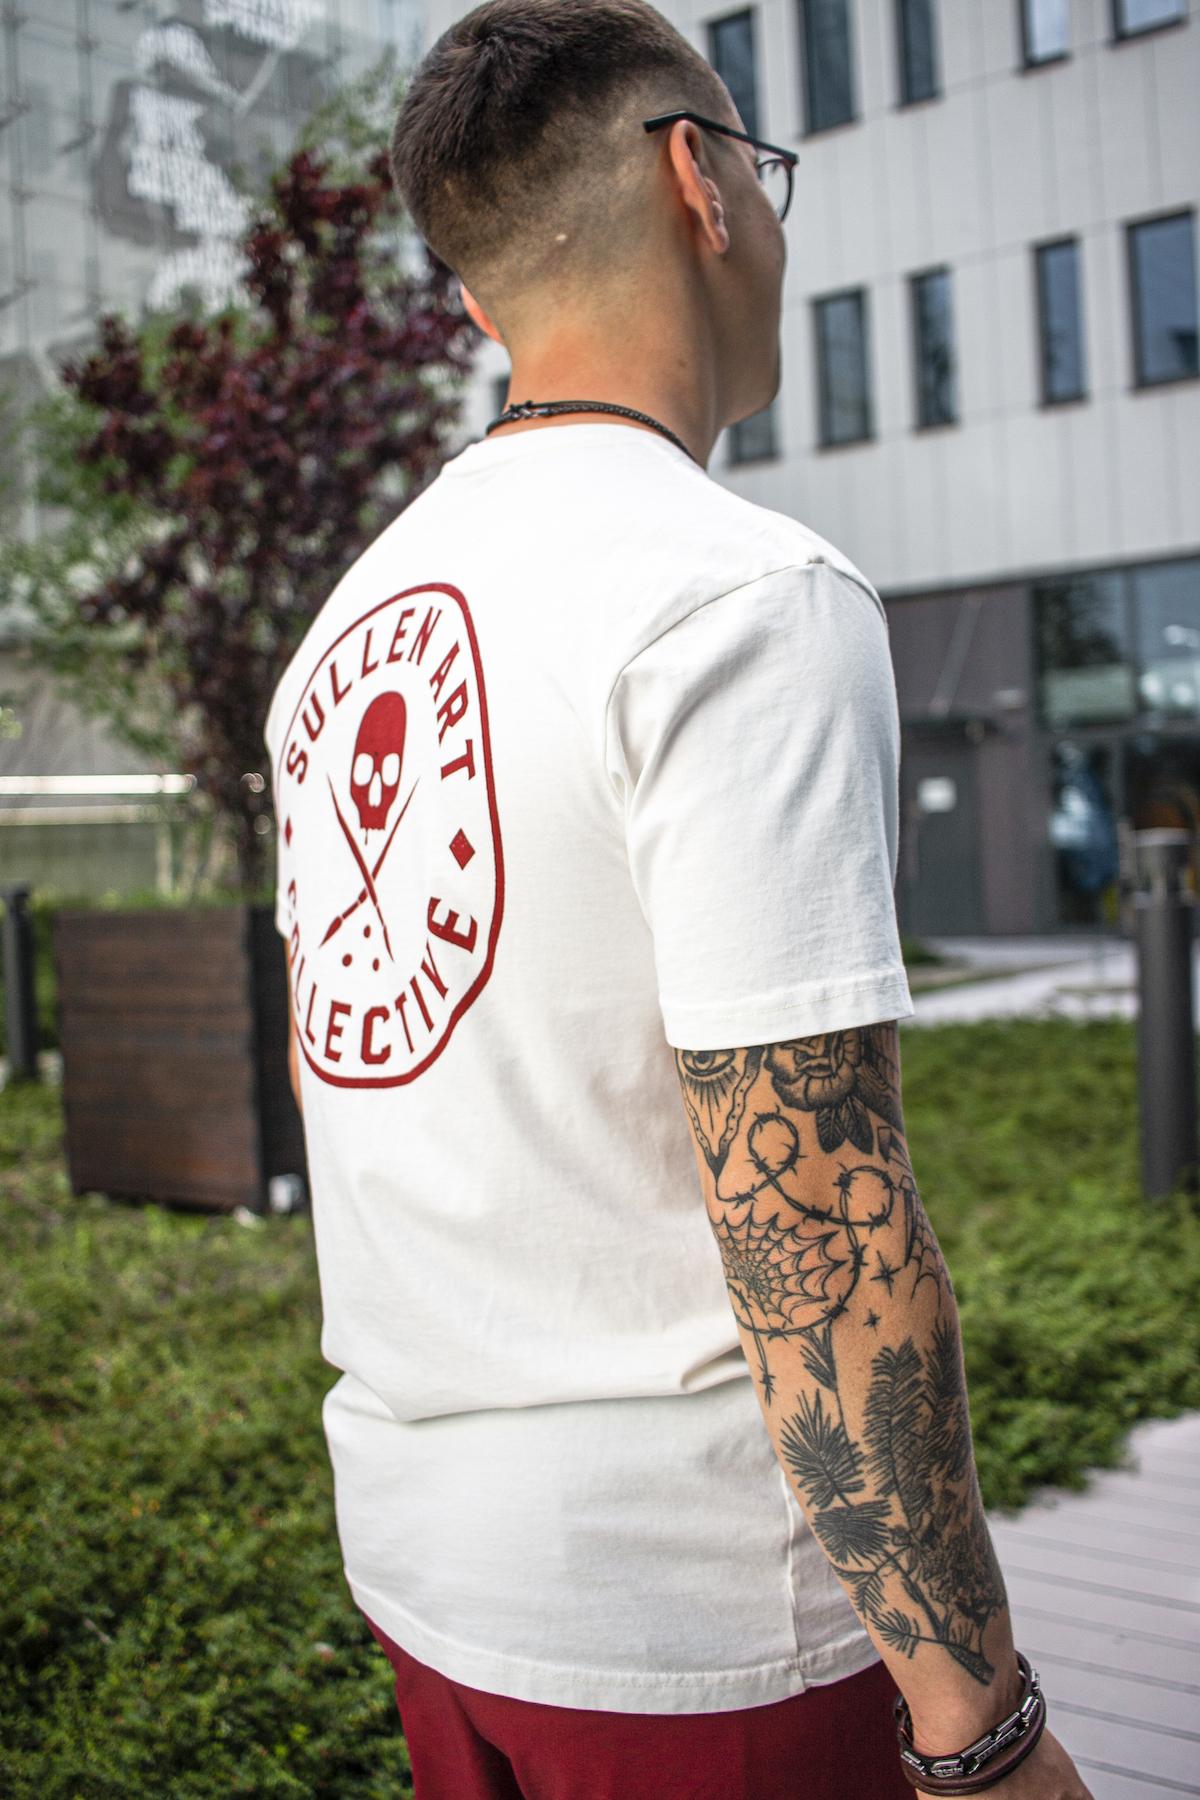 An excellent selection of stylish and comfortable clothing for tattoo lovers and beach lifers